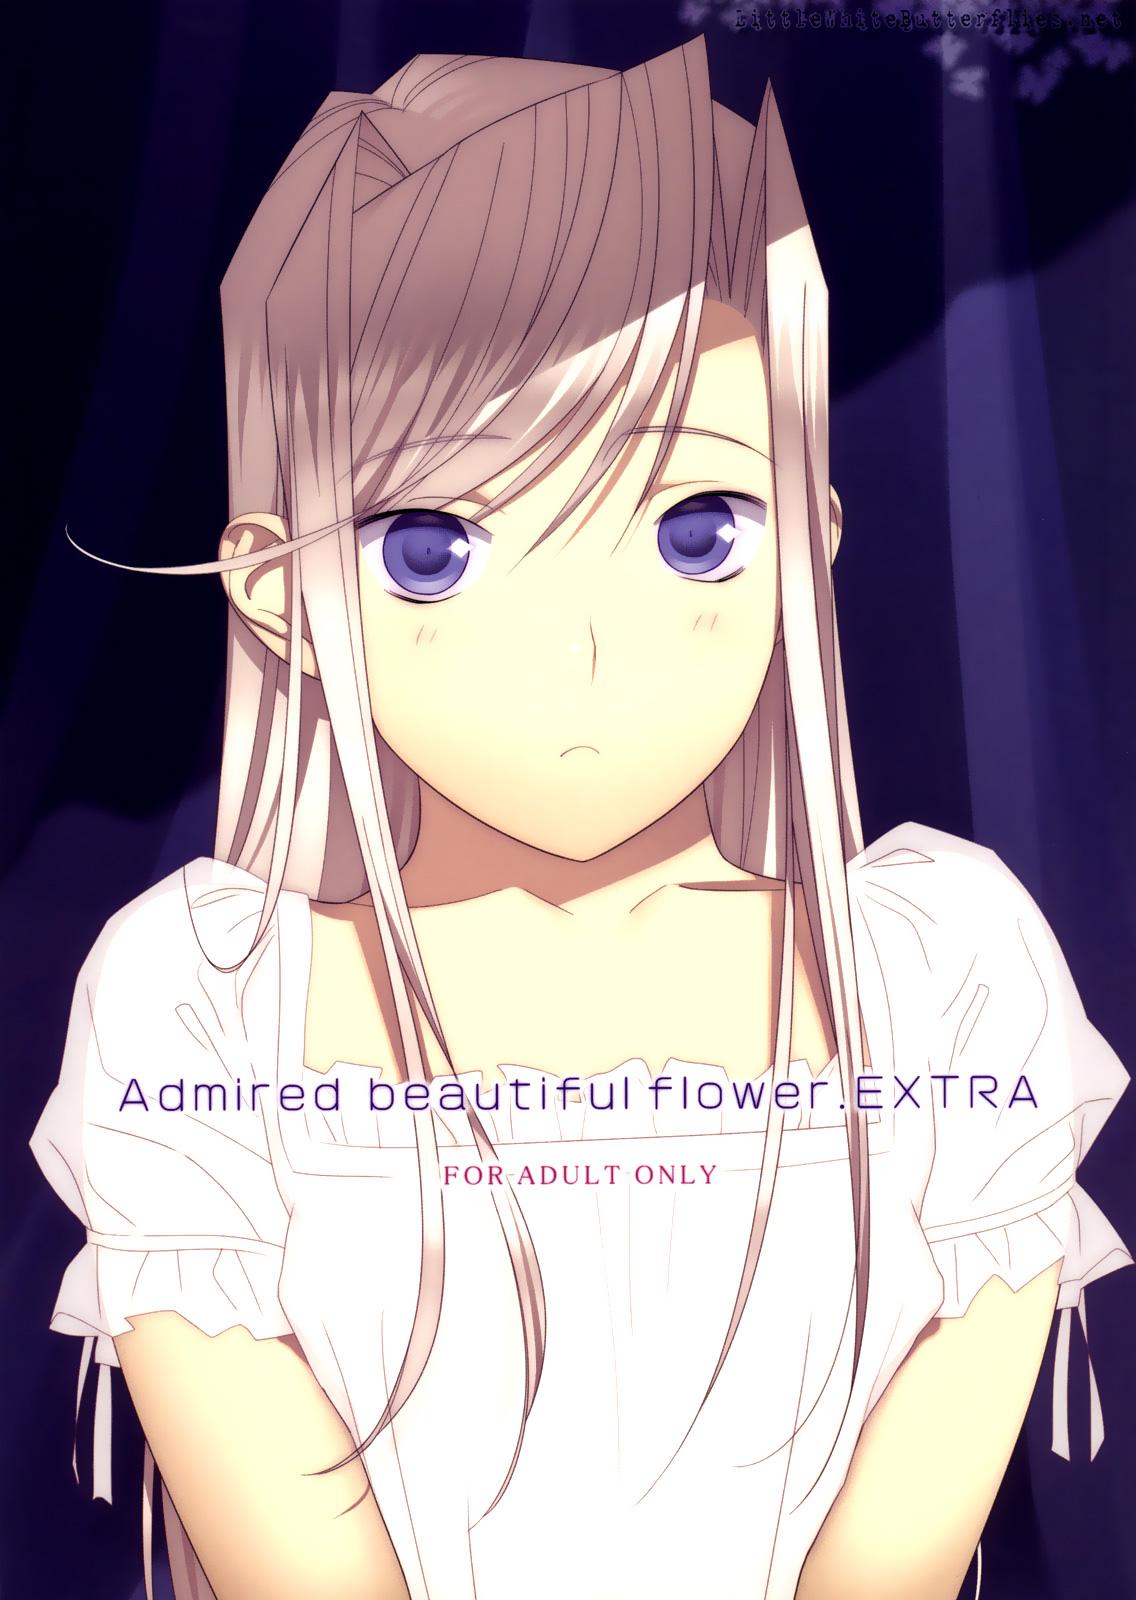 Amador Admired Beautiful Flower Extra - Princess lover Real Amateurs - Page 1